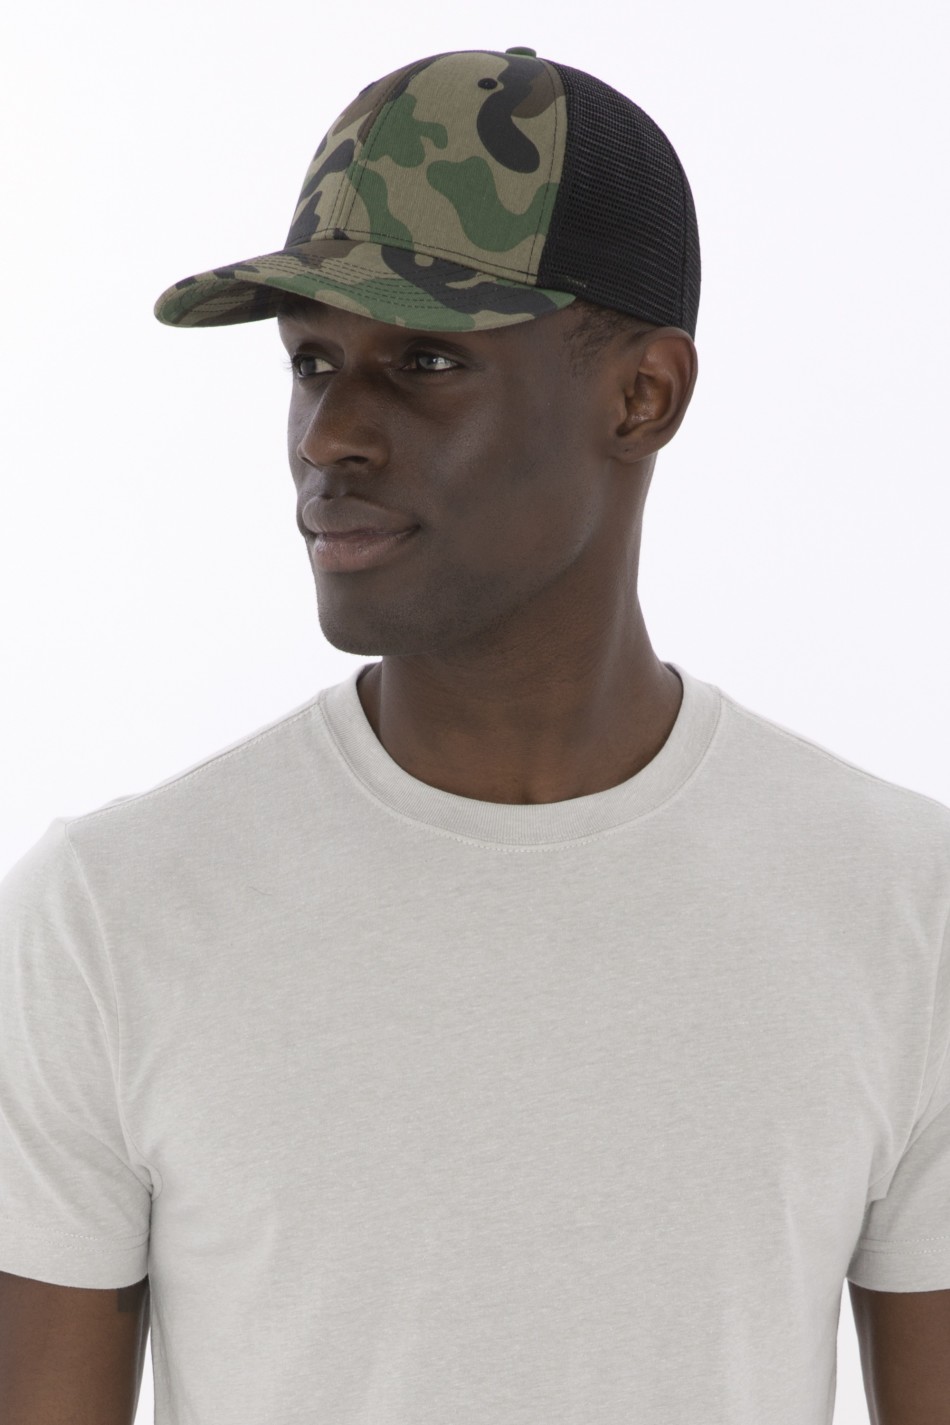 Camo Snap Back Trucker Hat By American Hat Makers, 49% OFF